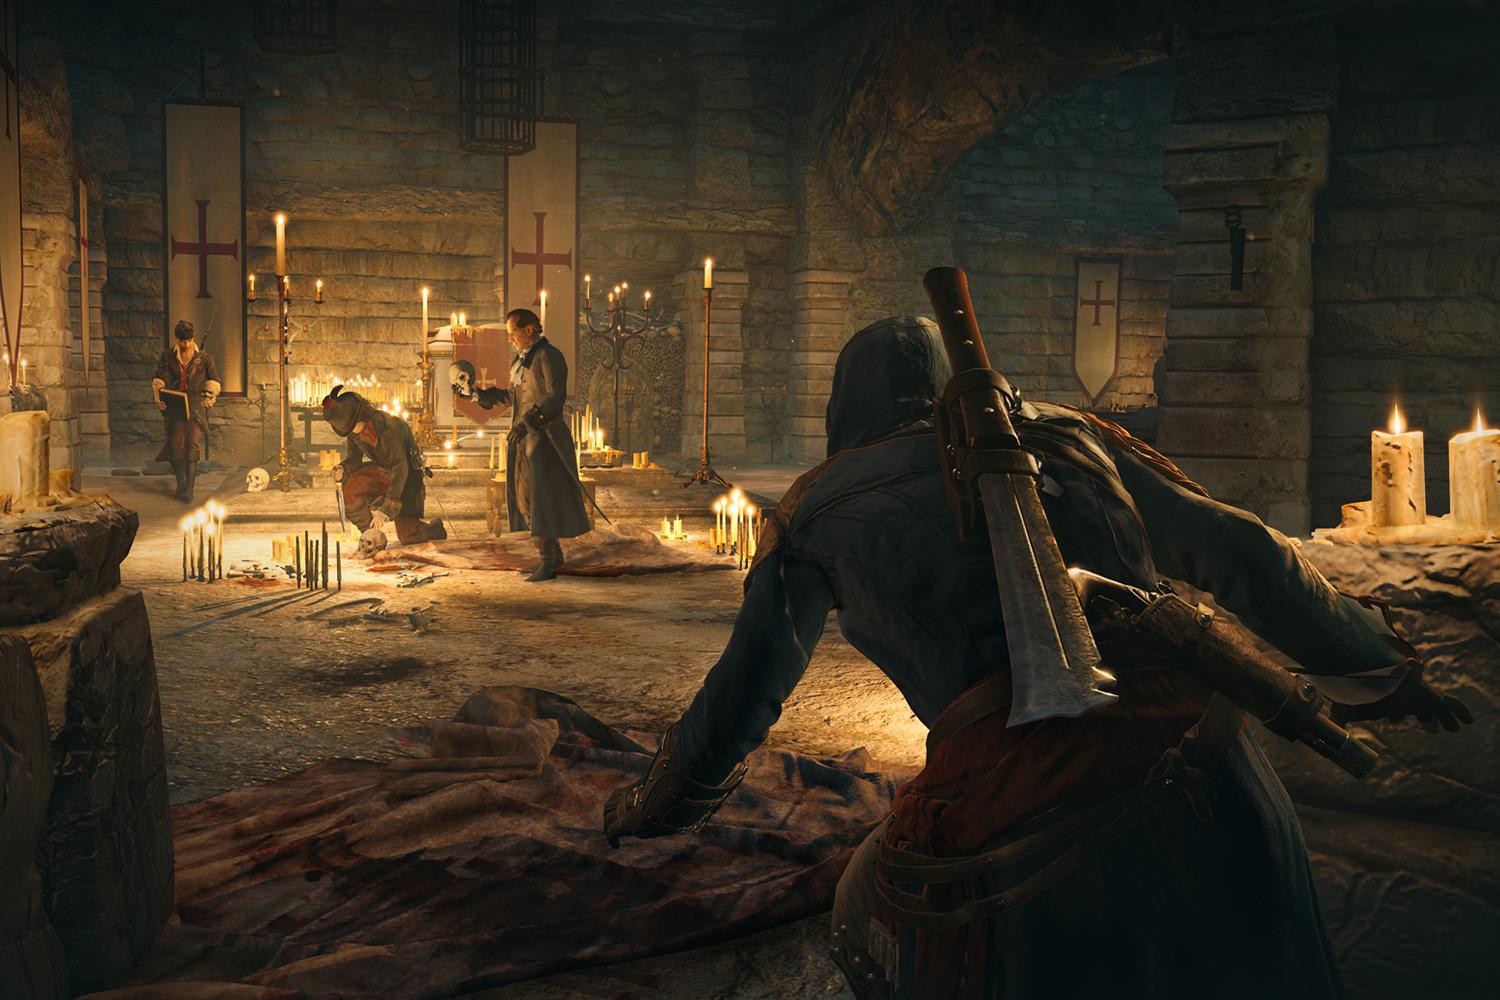 Buy Assassin's Creed Valhalla - Season Pass from the Humble Store